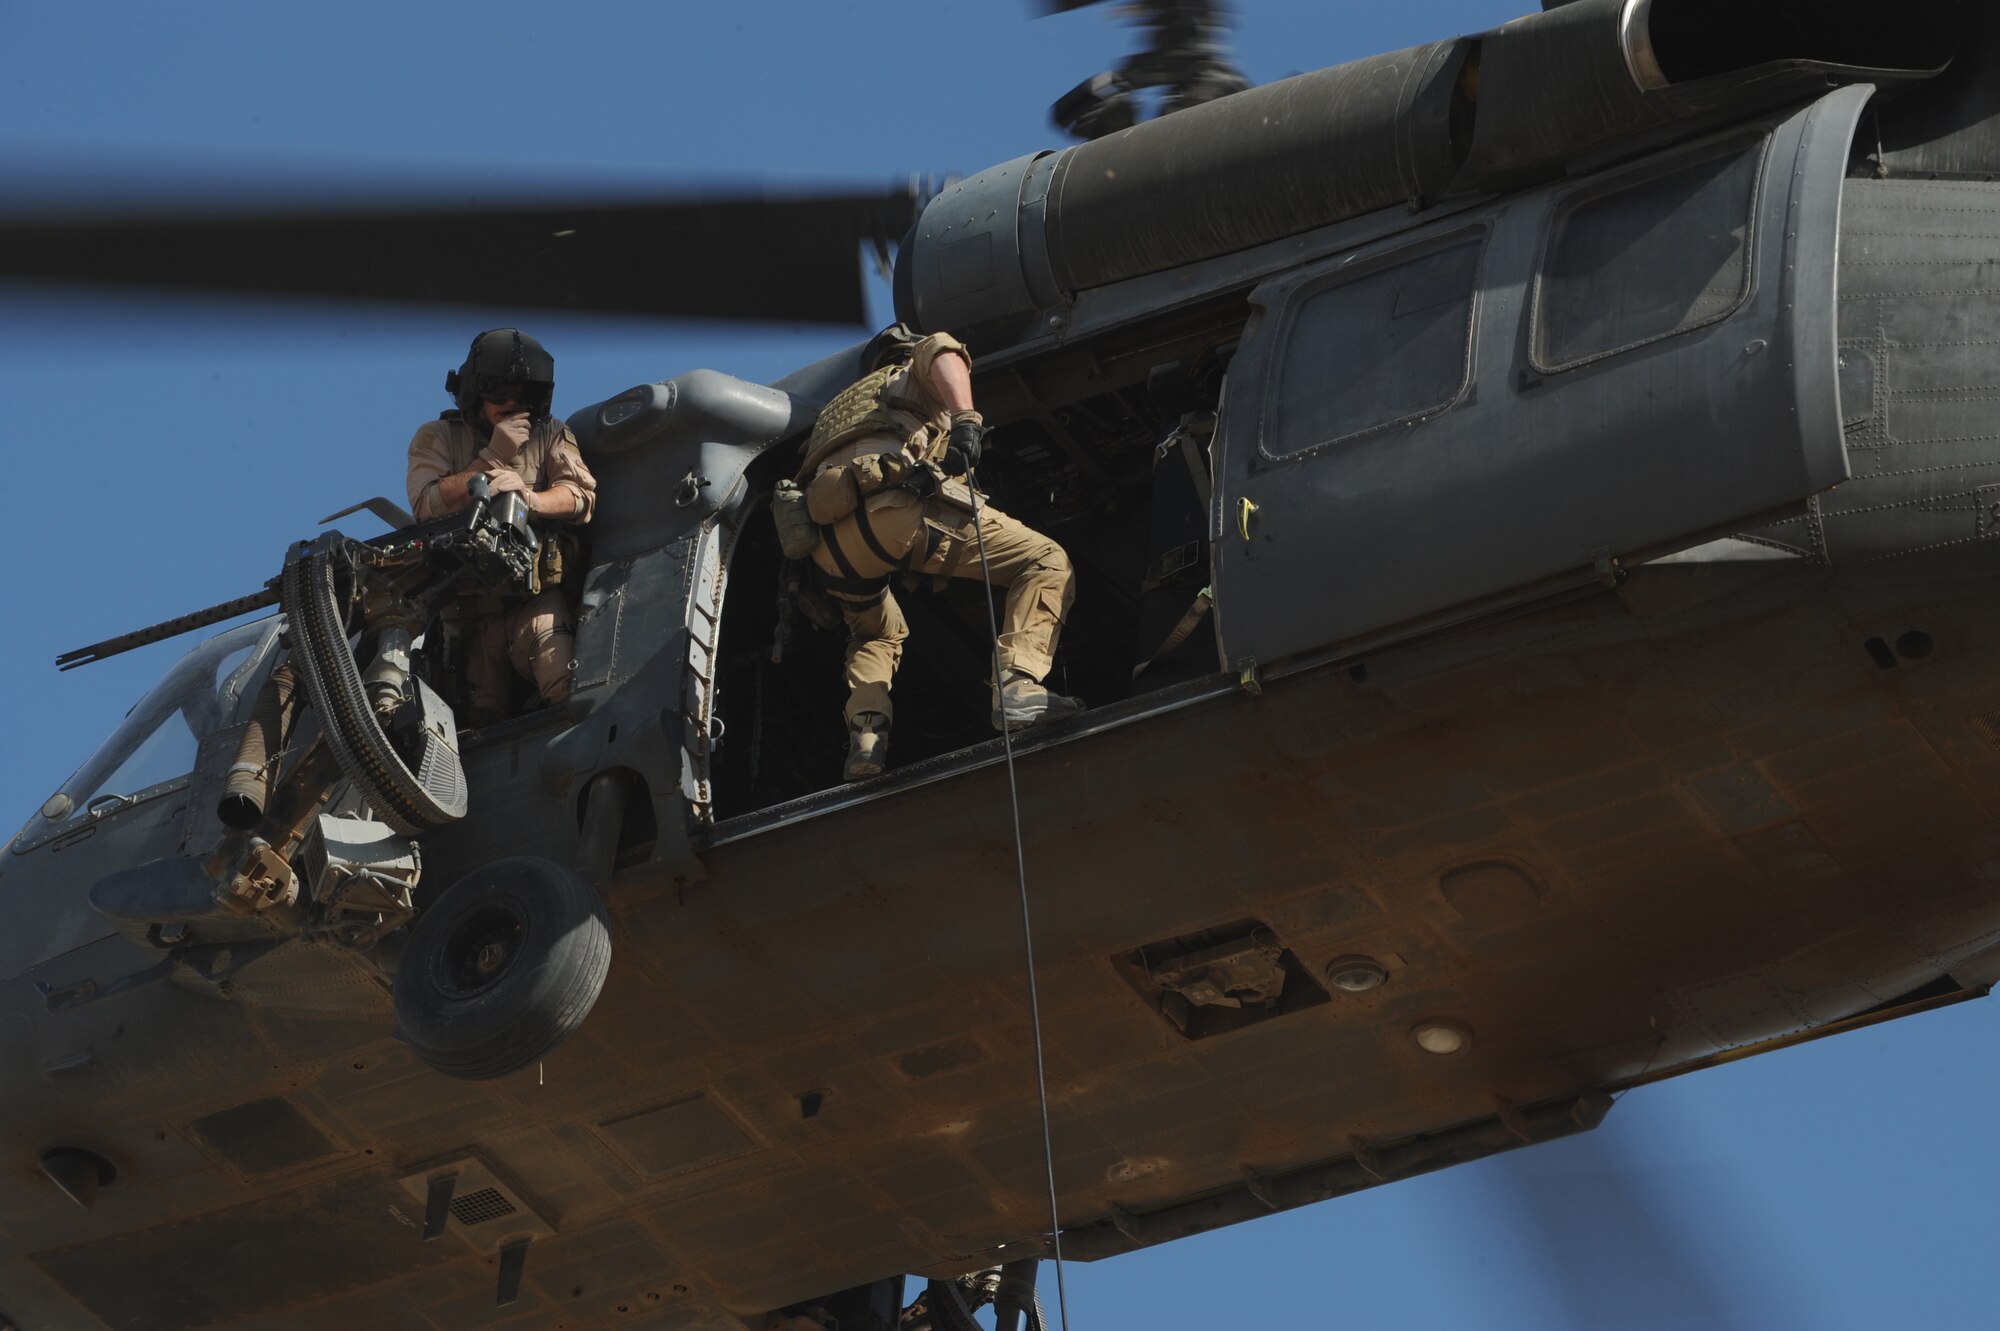 U.S. Air Force Pararescueman Senior Airman Matthew, from the 64th Expeditionary Rescue Squadron, Joint Base Balad, Iraq, prepares to repel from an HH-60 Pavehawk helicopter during a proficiency exercise outside of Baghdad, Iraq, April 10, 2009, in support of Operation Iraqi Freedom.  (U.S. Air Force photo by Staff Sgt. James L. Harper Jr.)